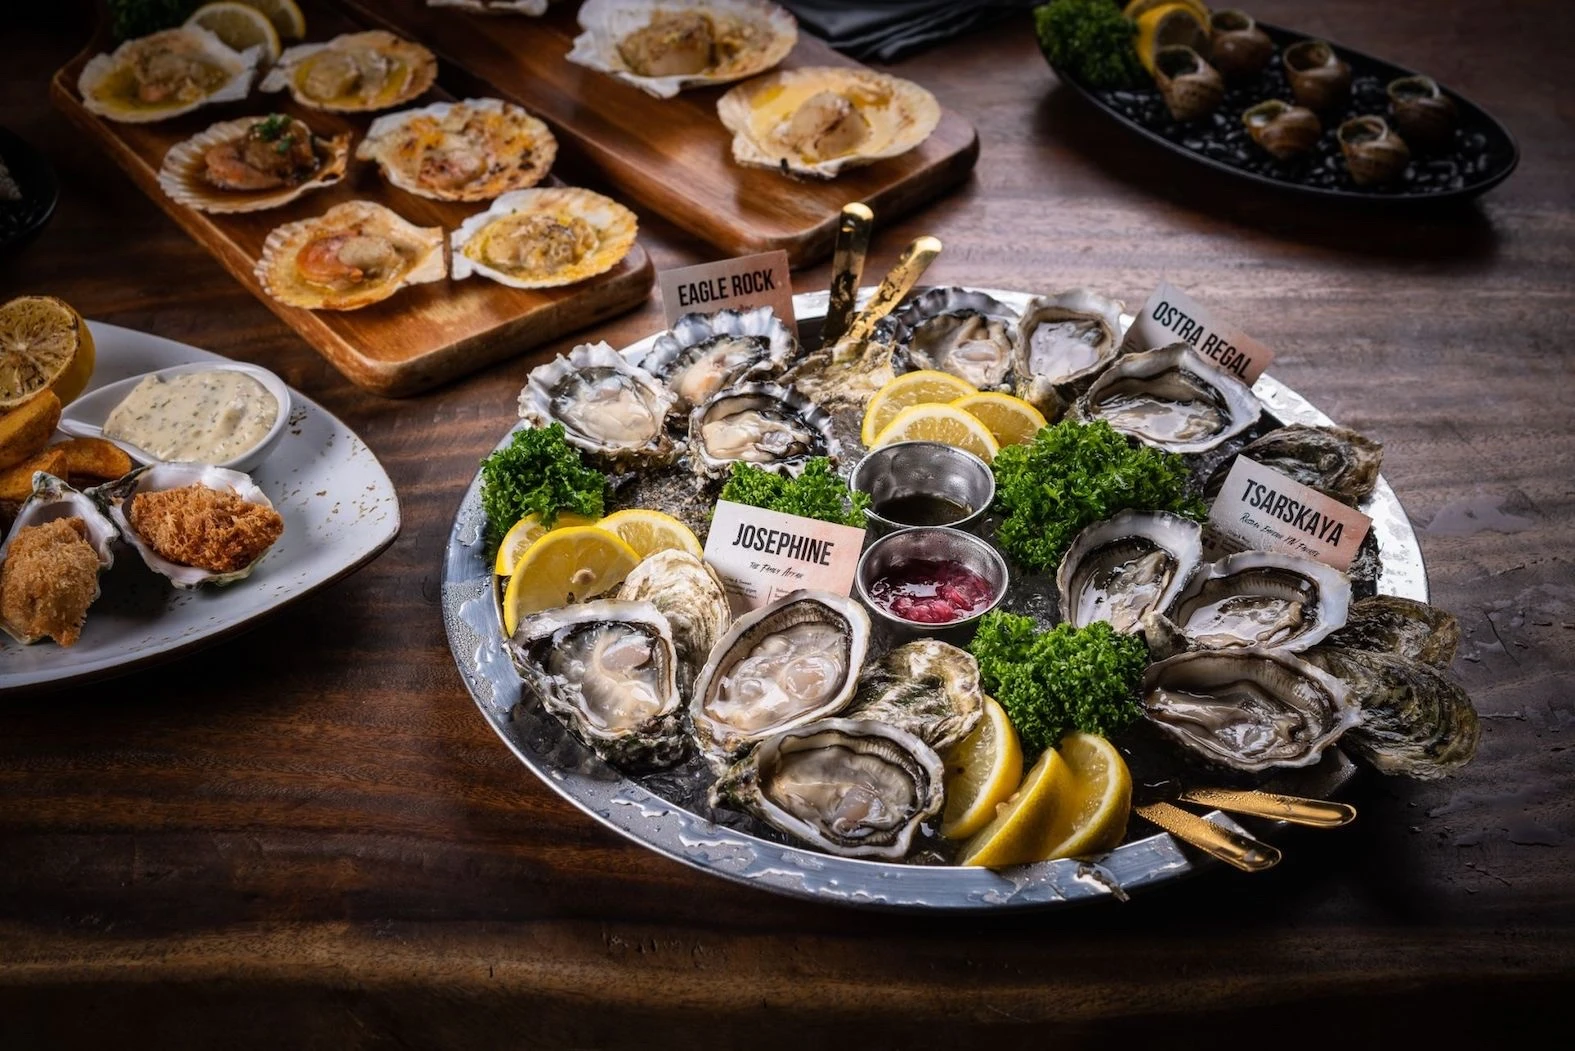 A table where there is an oyster platter and other seafood product at The Oyster Bar Escape in Bangkok. We can see different type of oysters presented with sauces and lemon slices.